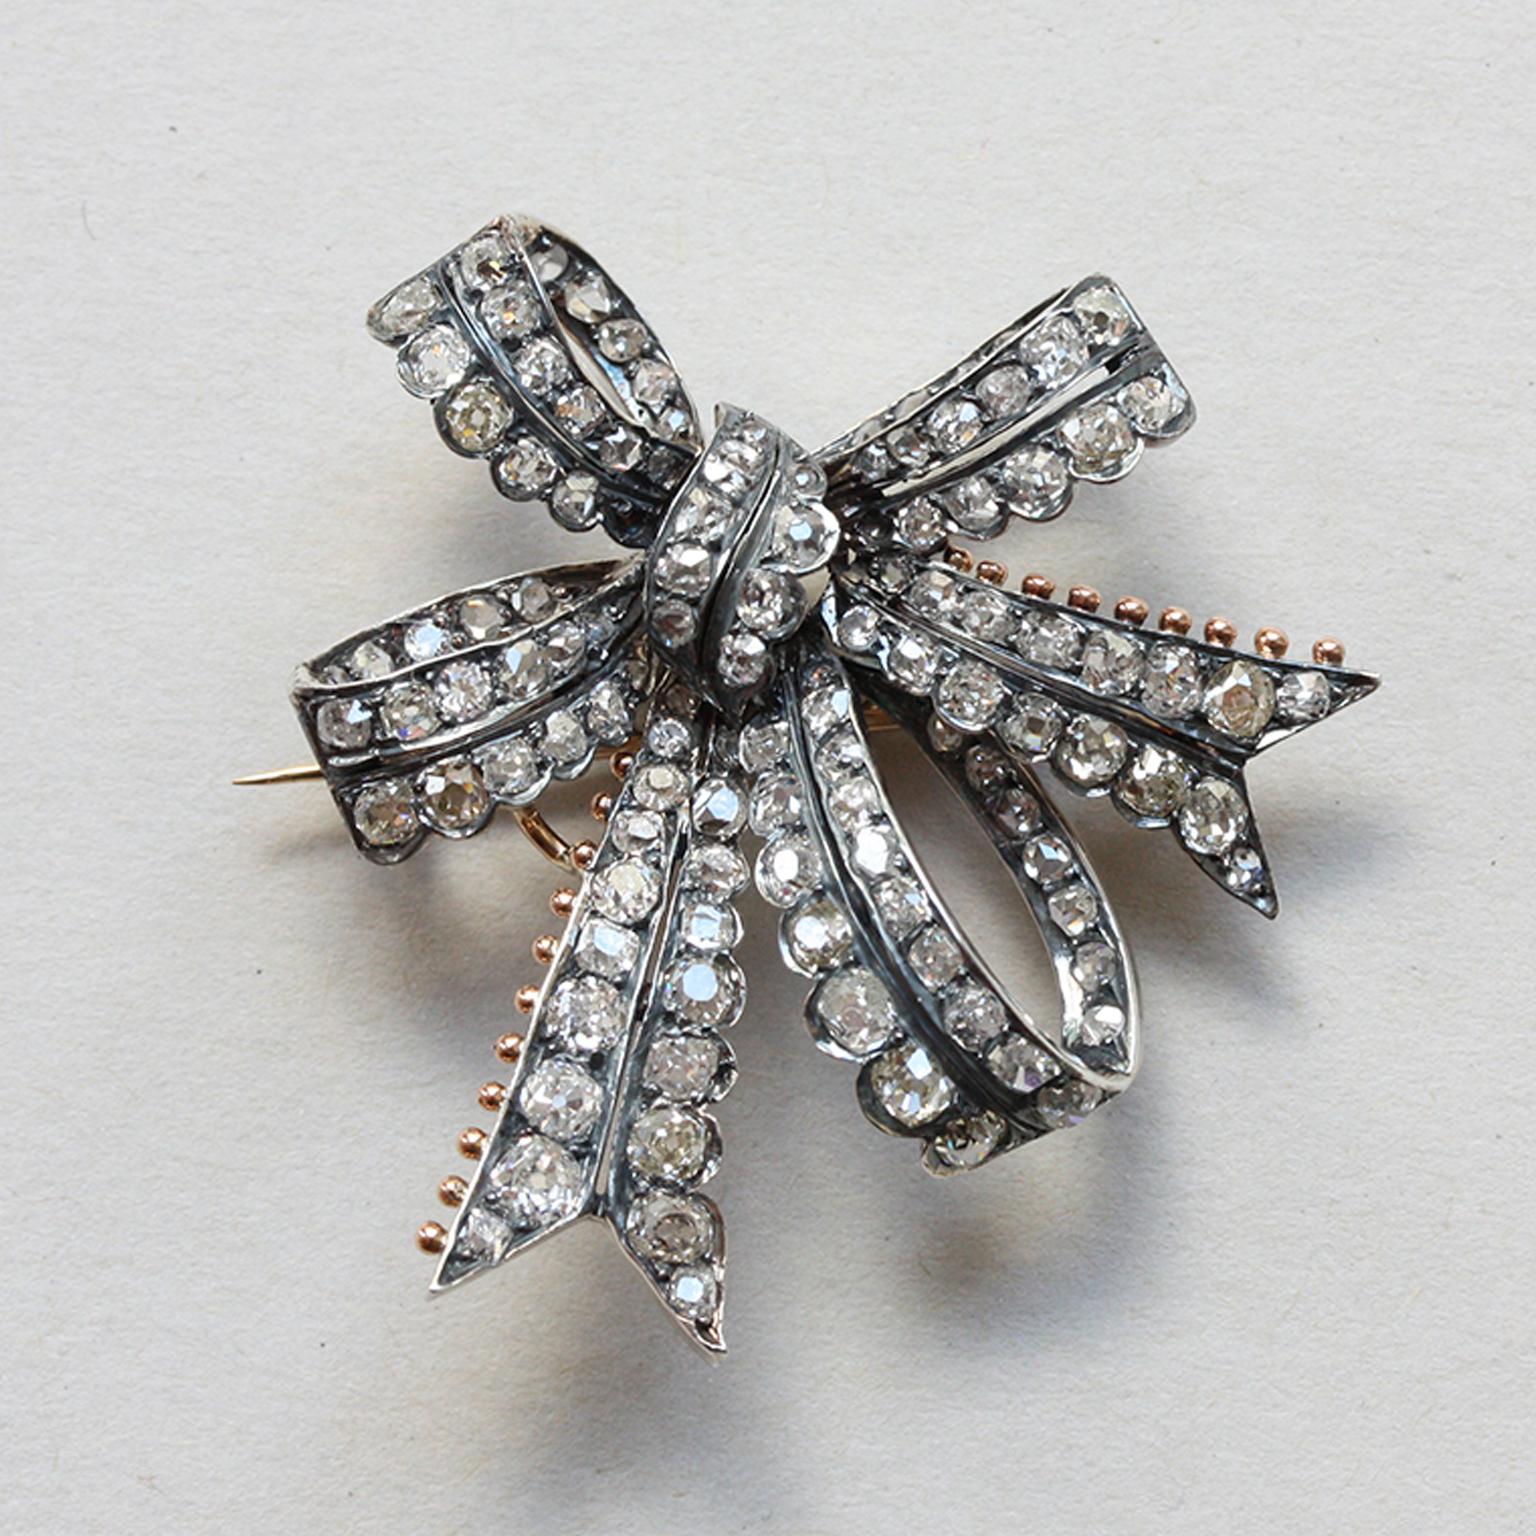 A silver double bow brooch set with chunky old-cut diamonds (app. 3.4 carats) with gold backing. One edge of the bow has scalloped sides and the ends of the ribbon are decorated with small gold balls. England, circa 1880.

weight: 9.92